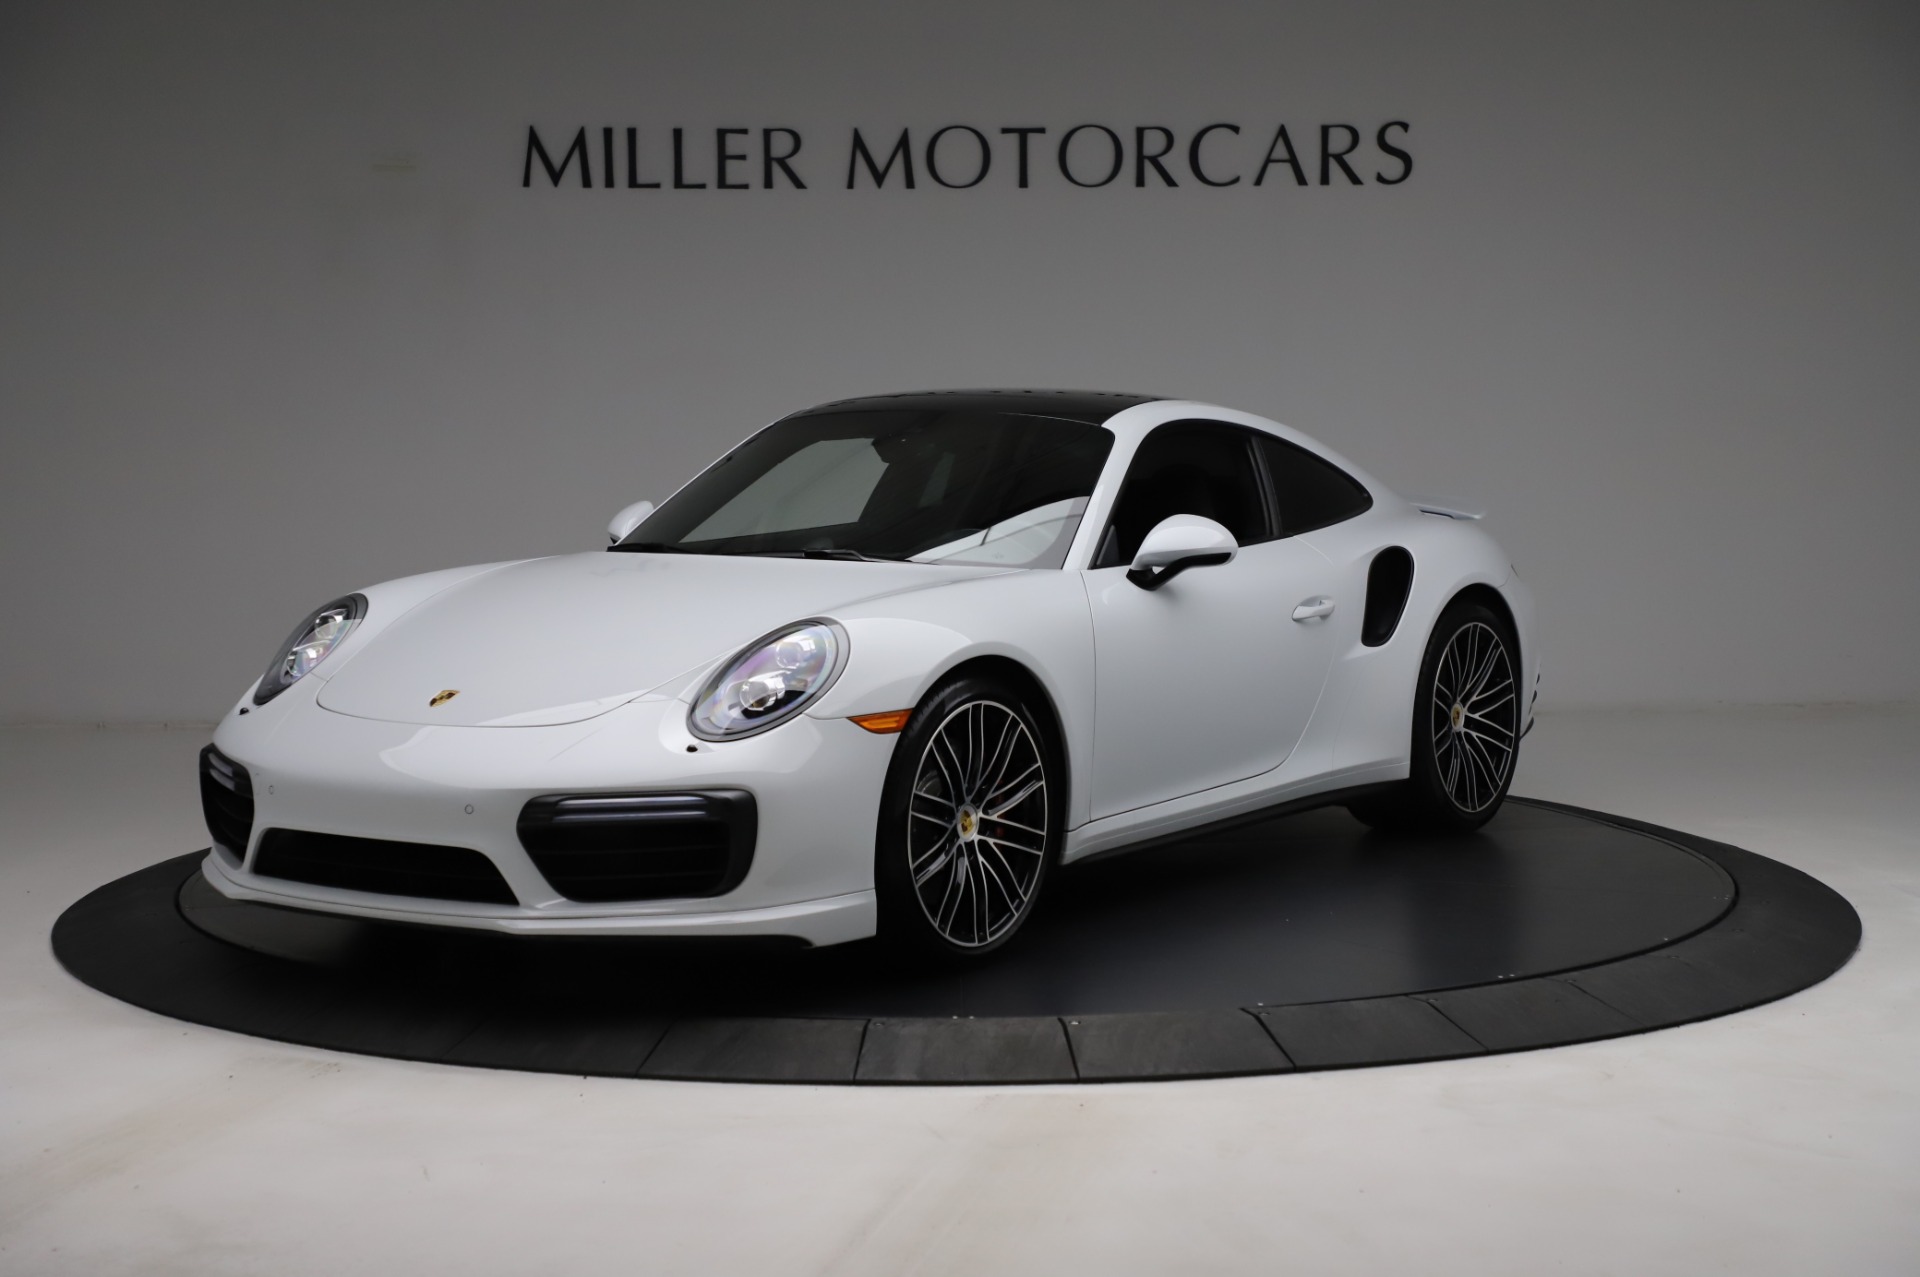 Used 2018 Porsche 911 Turbo for sale Sold at Maserati of Westport in Westport CT 06880 1